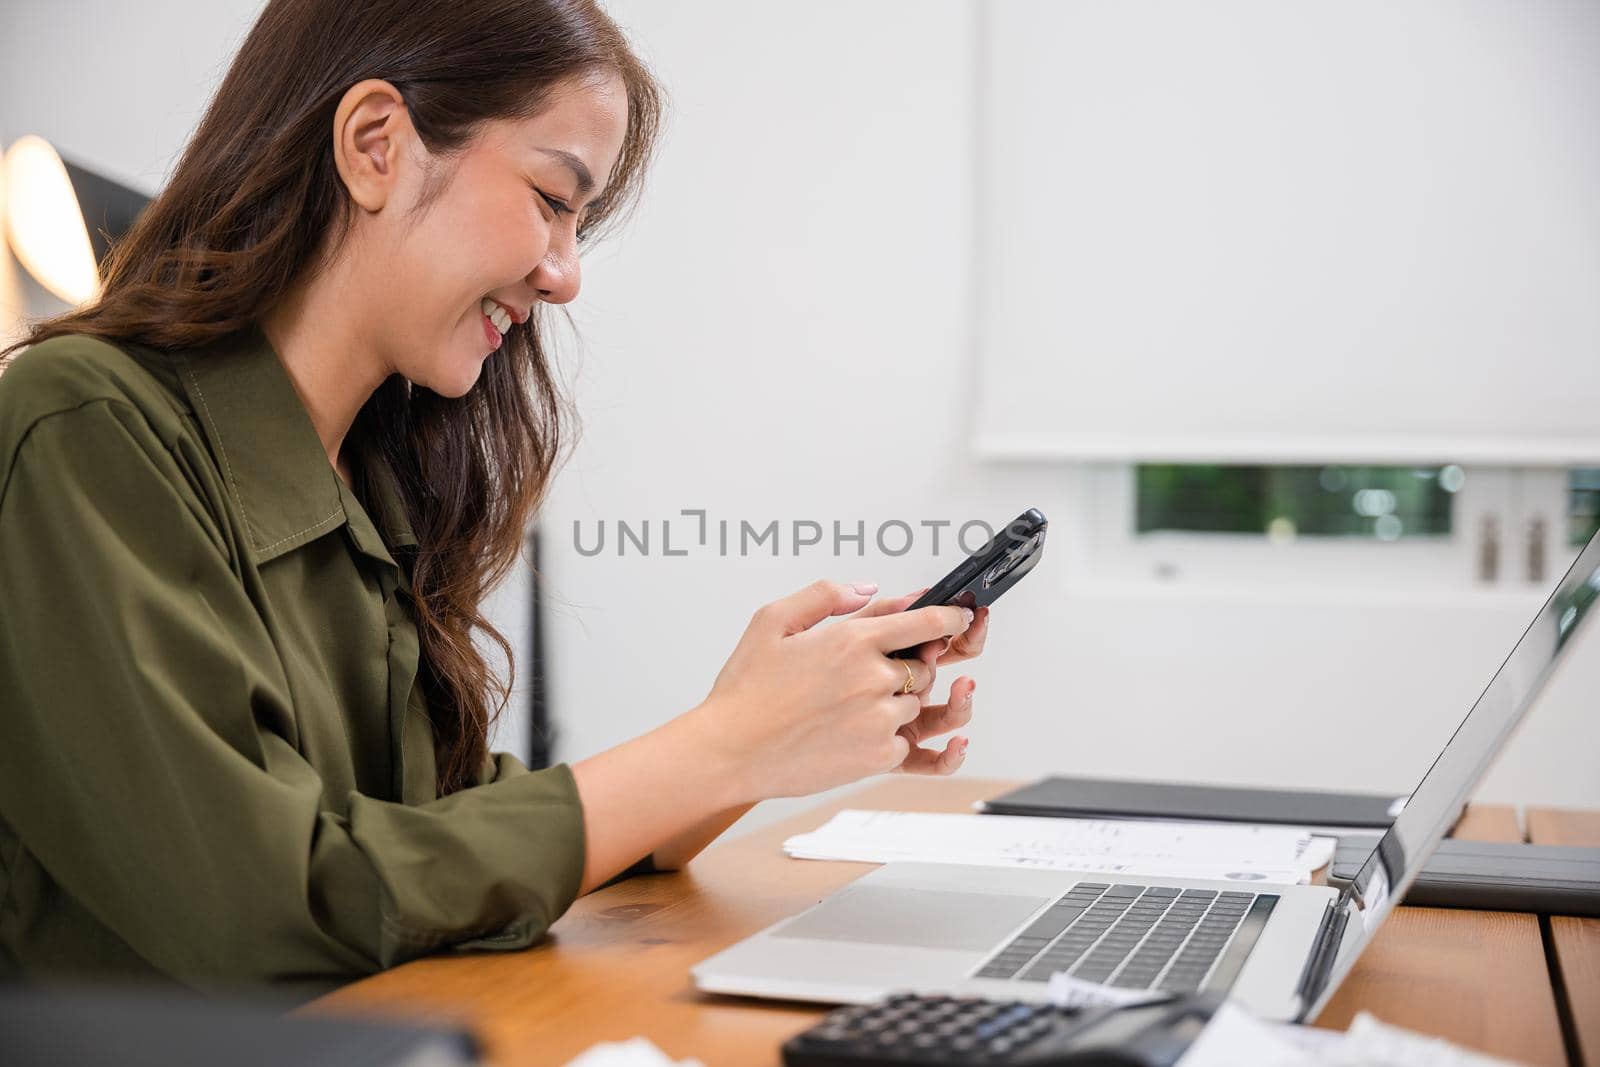 Asian young woman pay for goods digital payment success on smartphone, Smile female buy product on laptop computer she pay money by mobile phone, Easy E-commerce shopping online, lifestyles technology